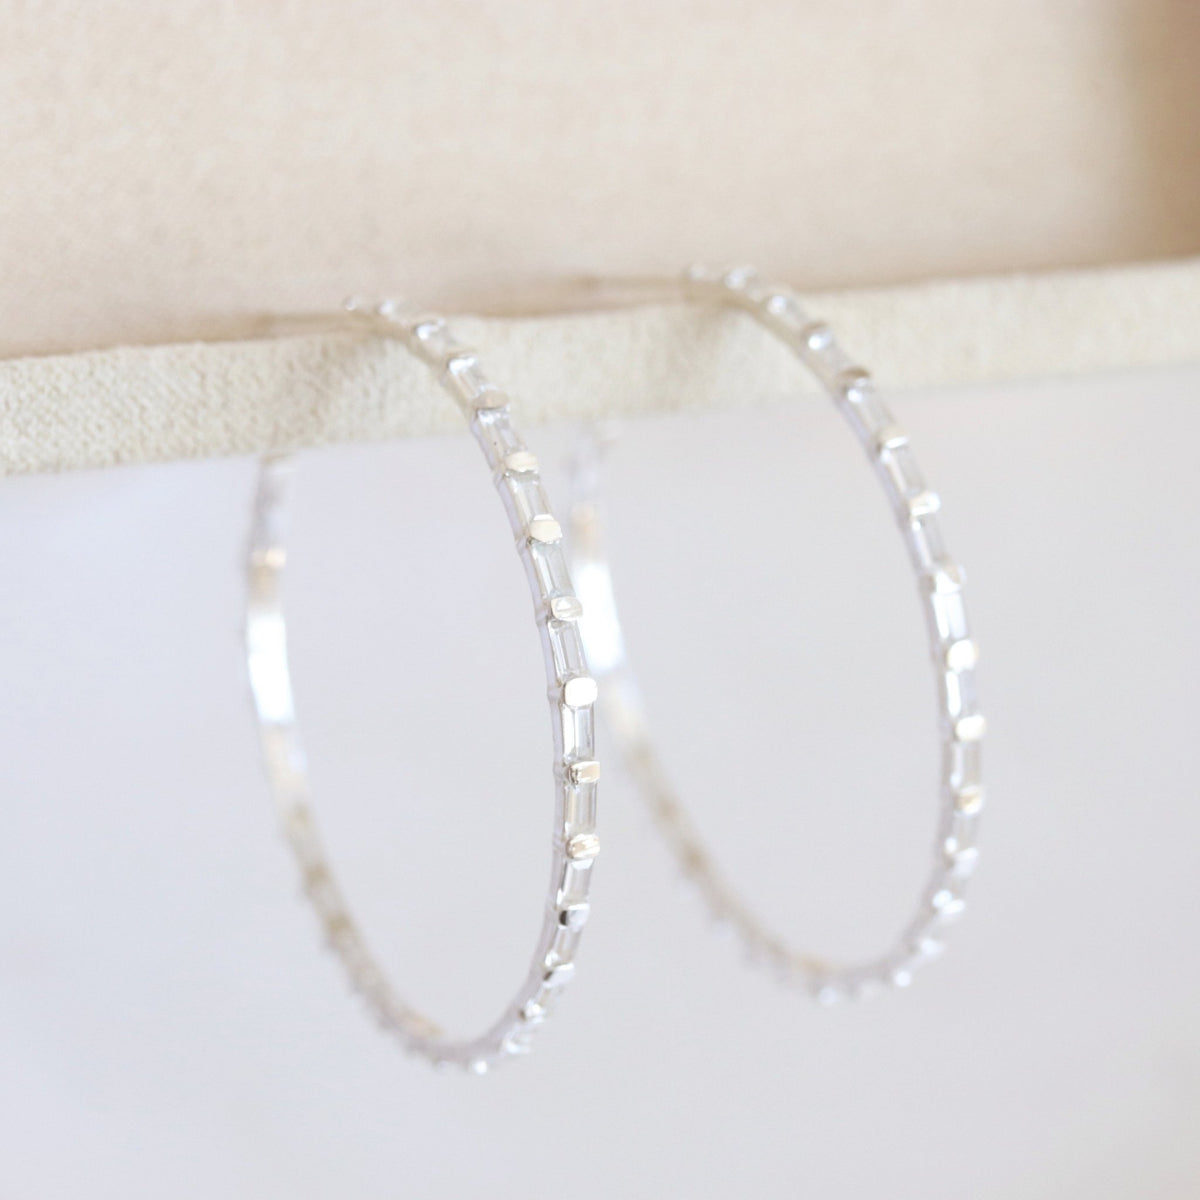 Loyal Studded Large Hoops - White Topaz &amp; Silver - SO PRETTY CARA COTTER